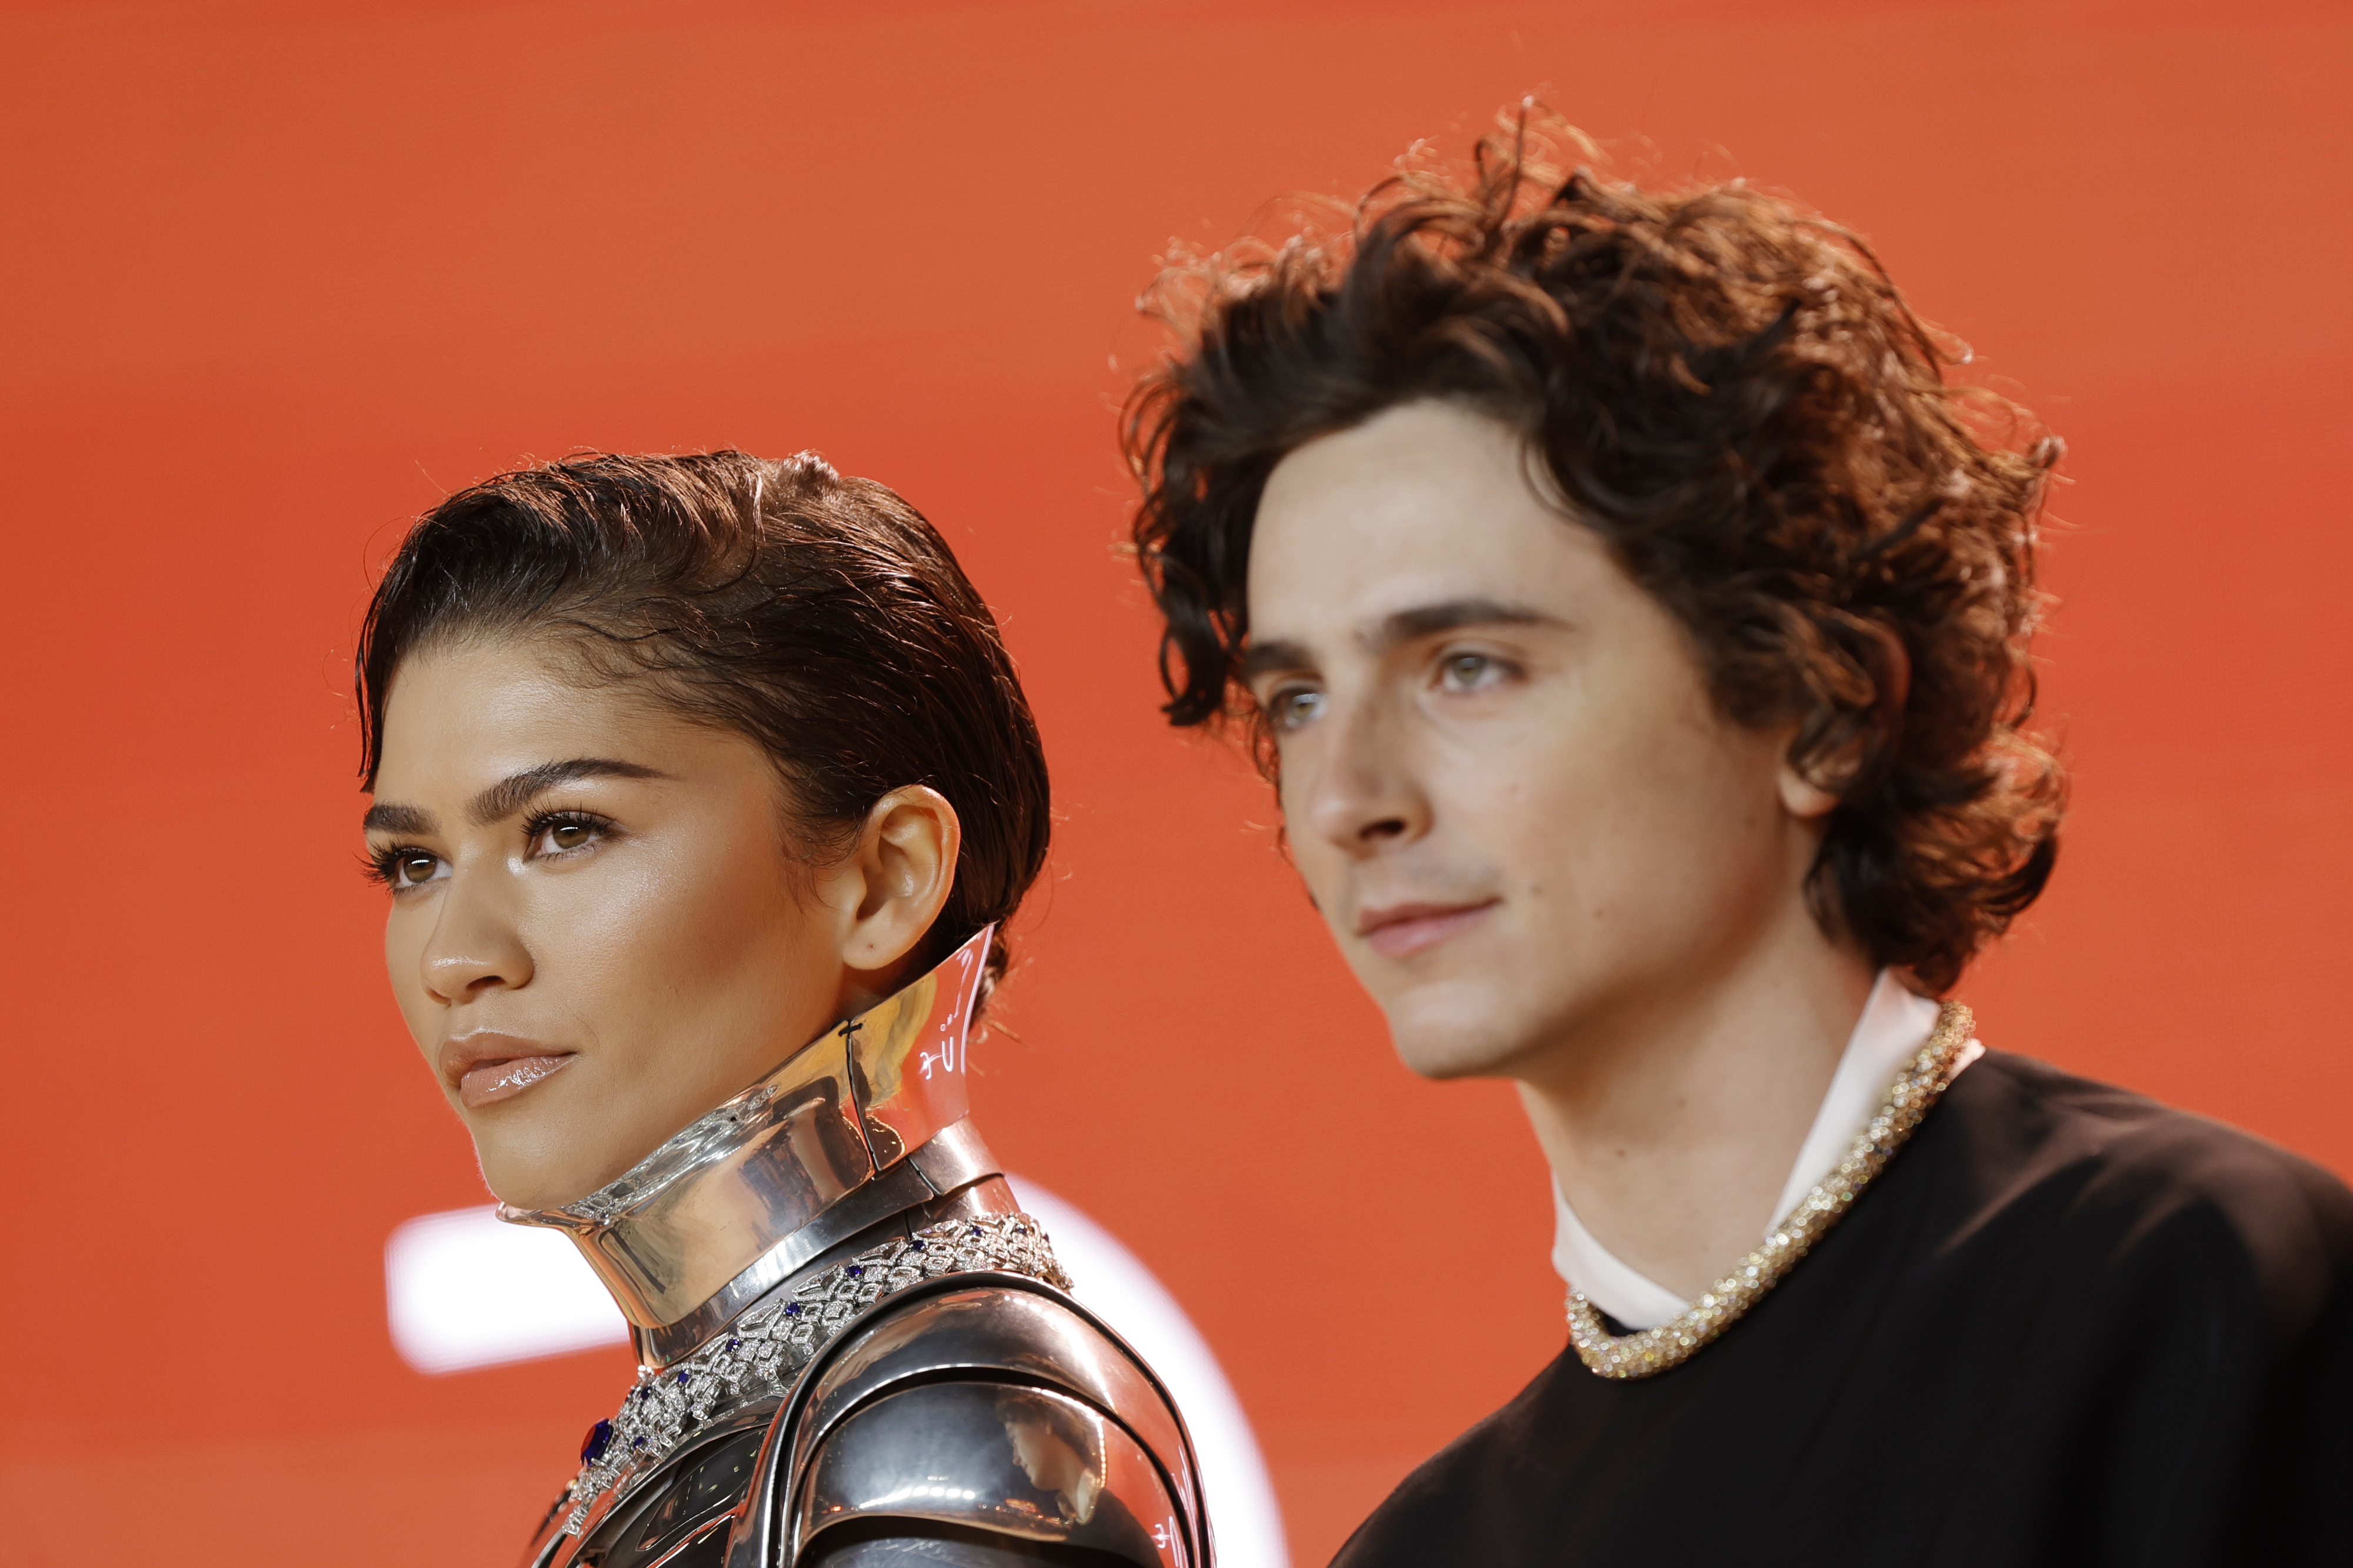 Zendaya in a metallic outfit and Timothée Chalamet in a black suit pose side by side